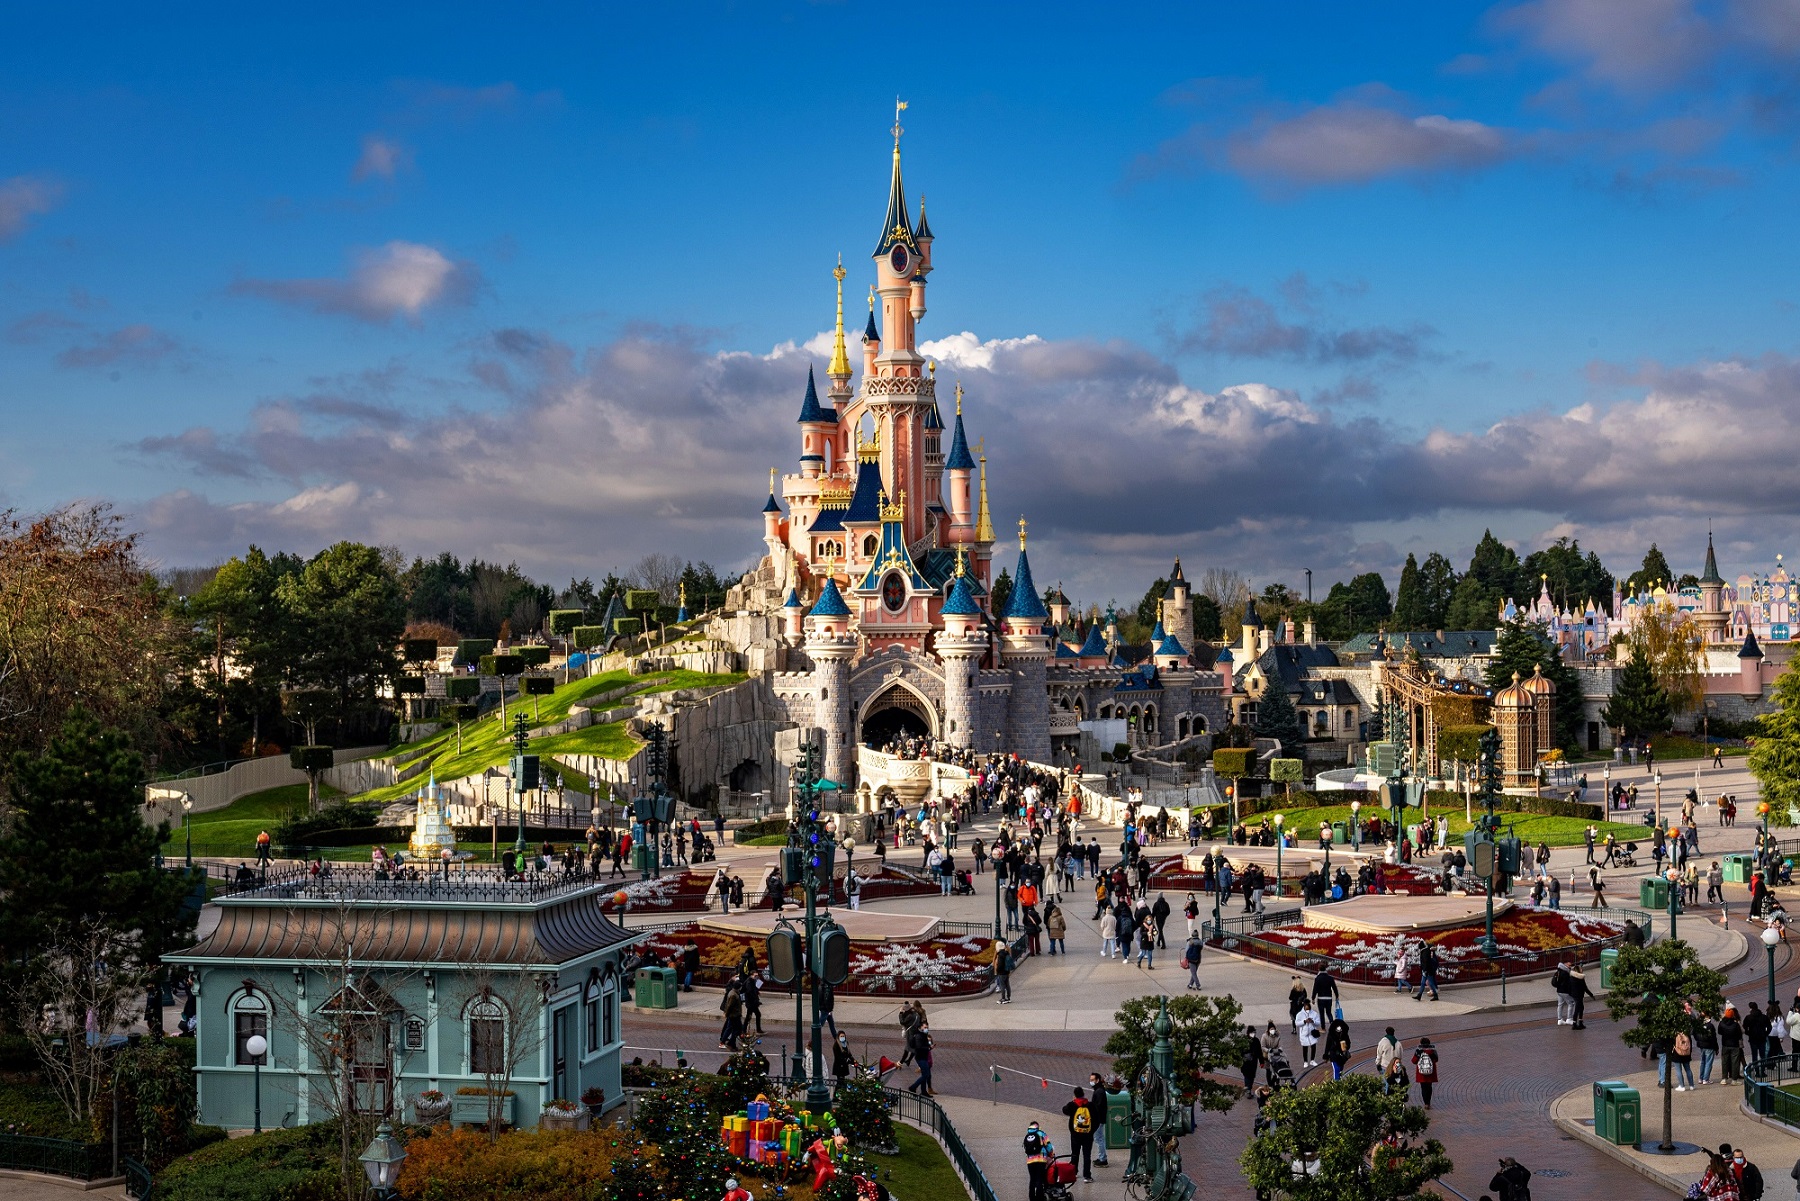 Awards and Accolades for Disneyland Paris in 2023